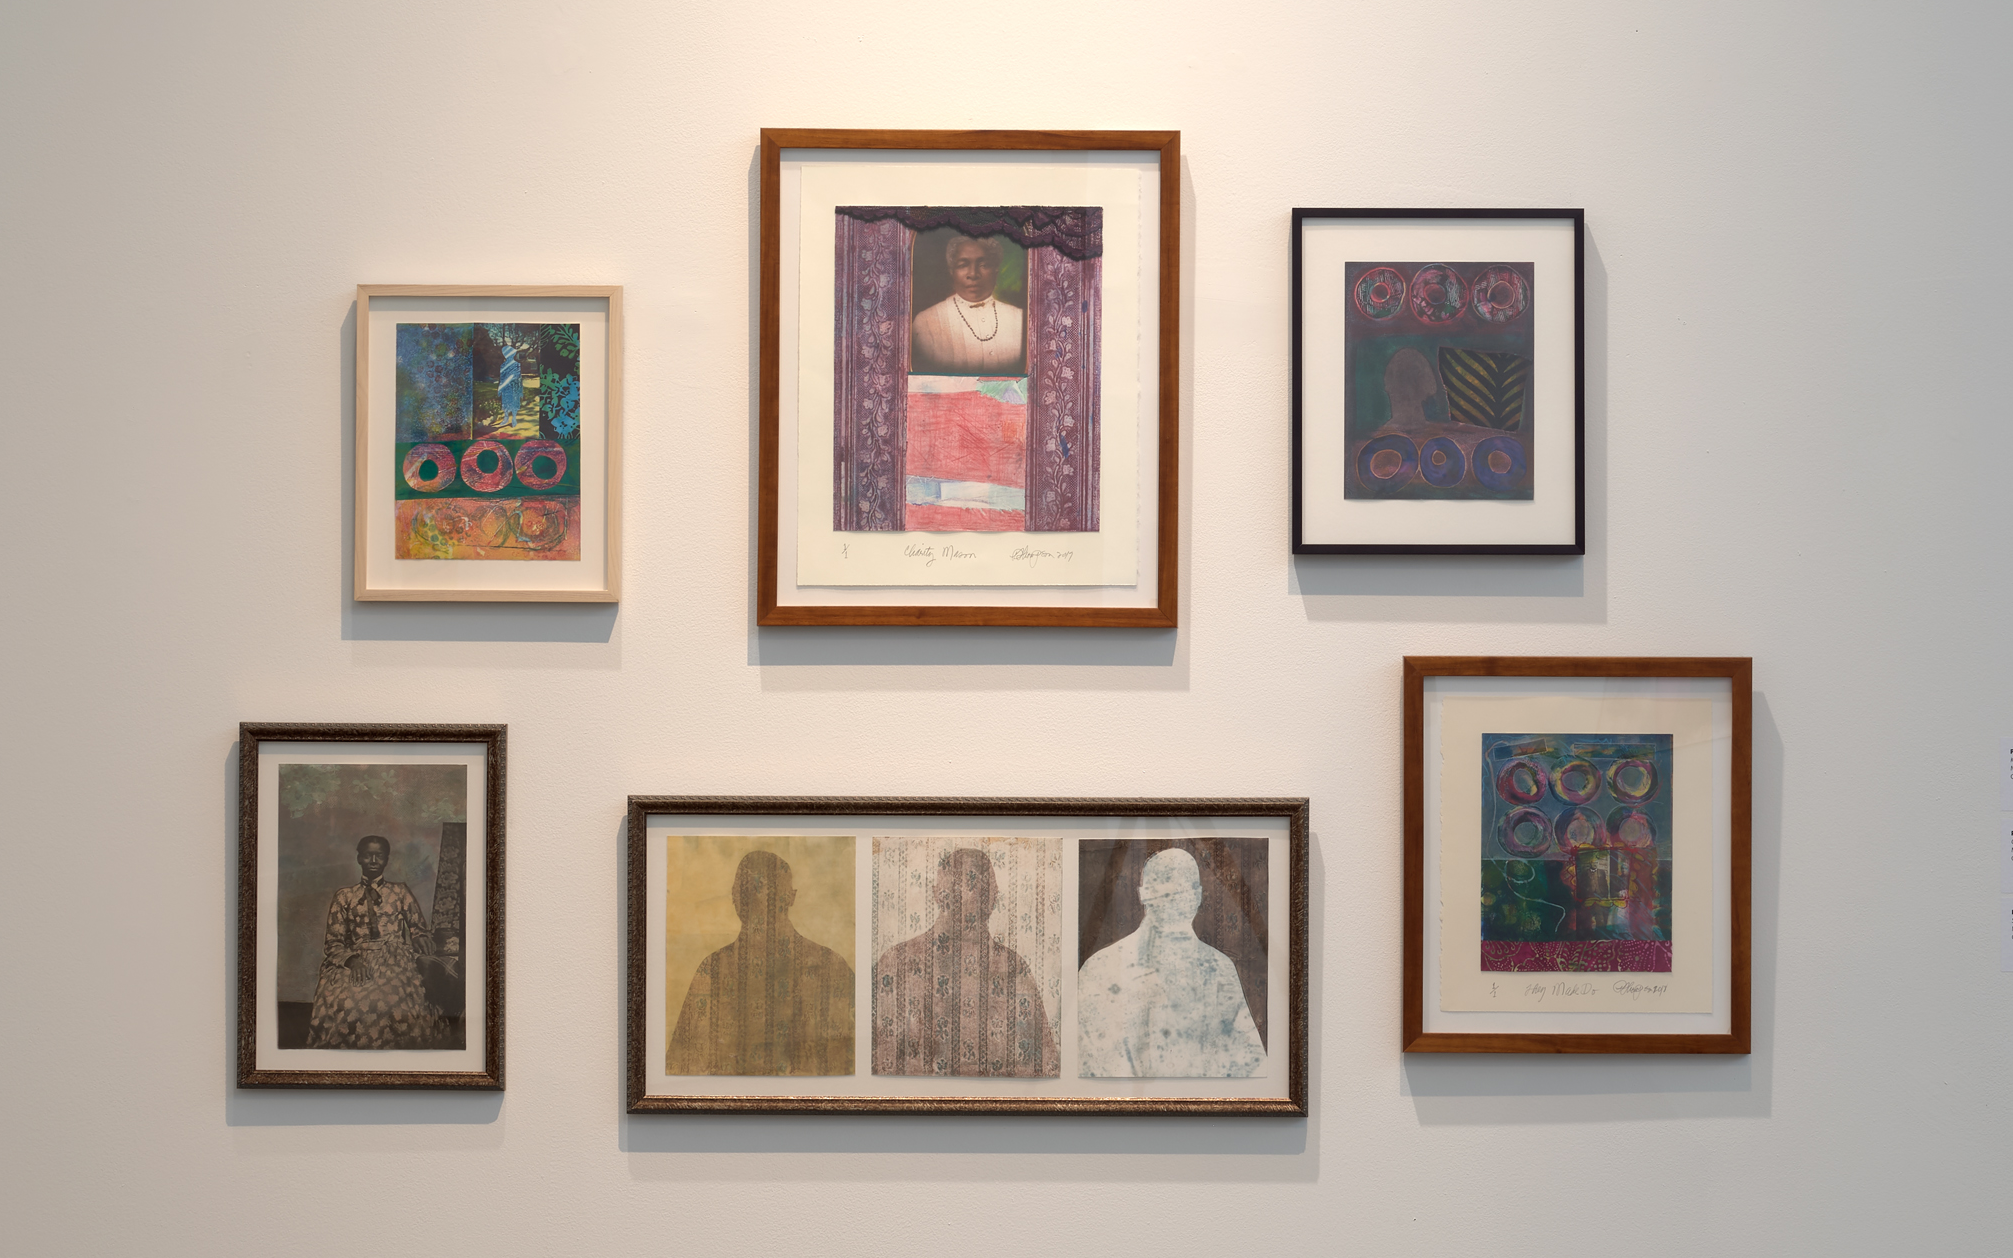 Six artworks hung in frames on a white wall showing patterned and colorful prints